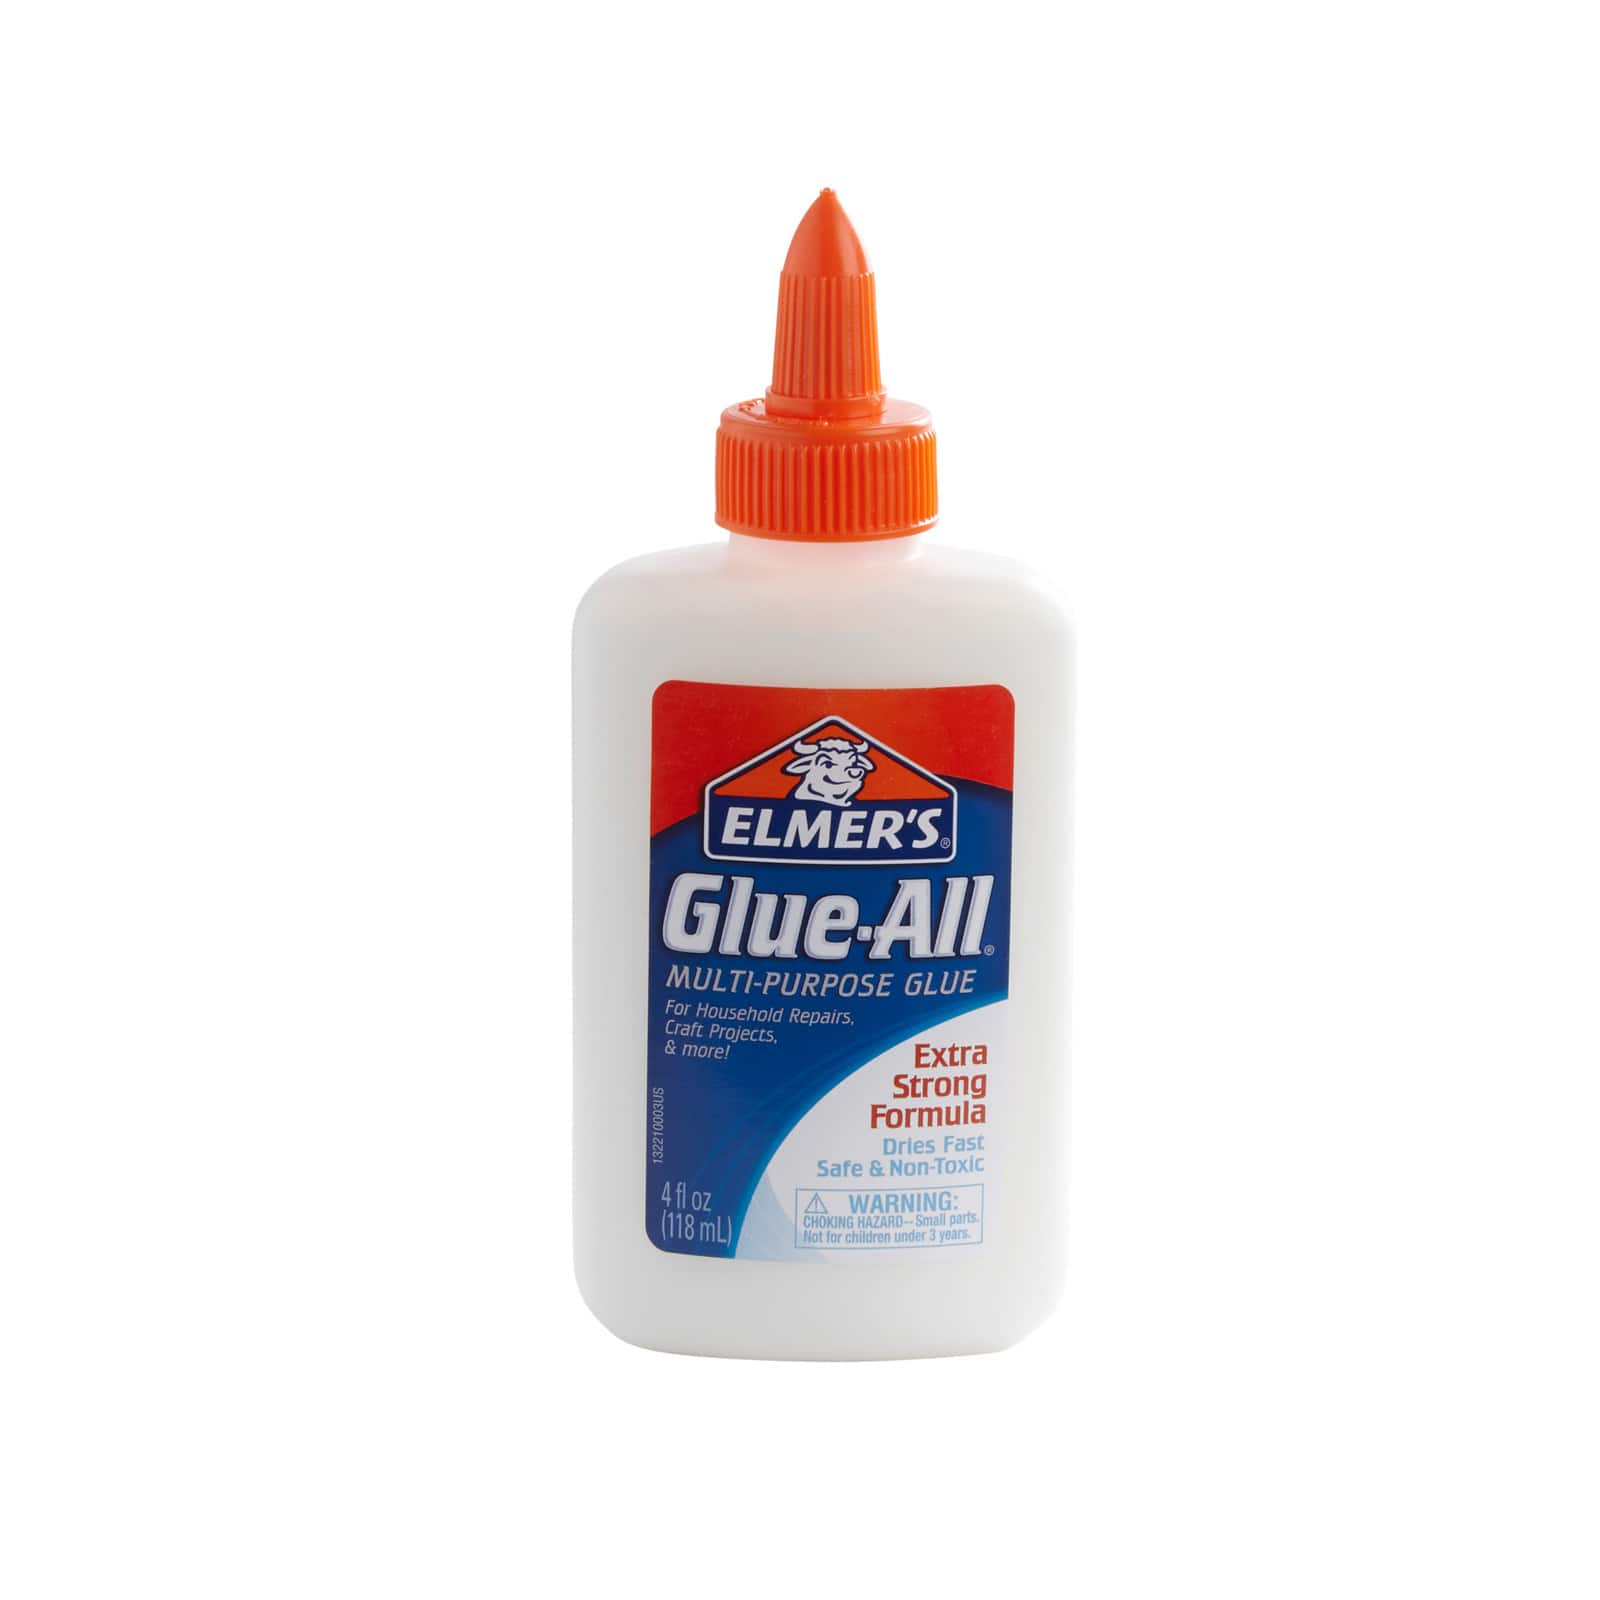 Craft Glue 2oz & Precision Tips, Craft Glue Bottles with Fine Tip, Craft Glue Quick Dry Clear, Strong Tacky Glue, Fabric Glue Permanent for Paper